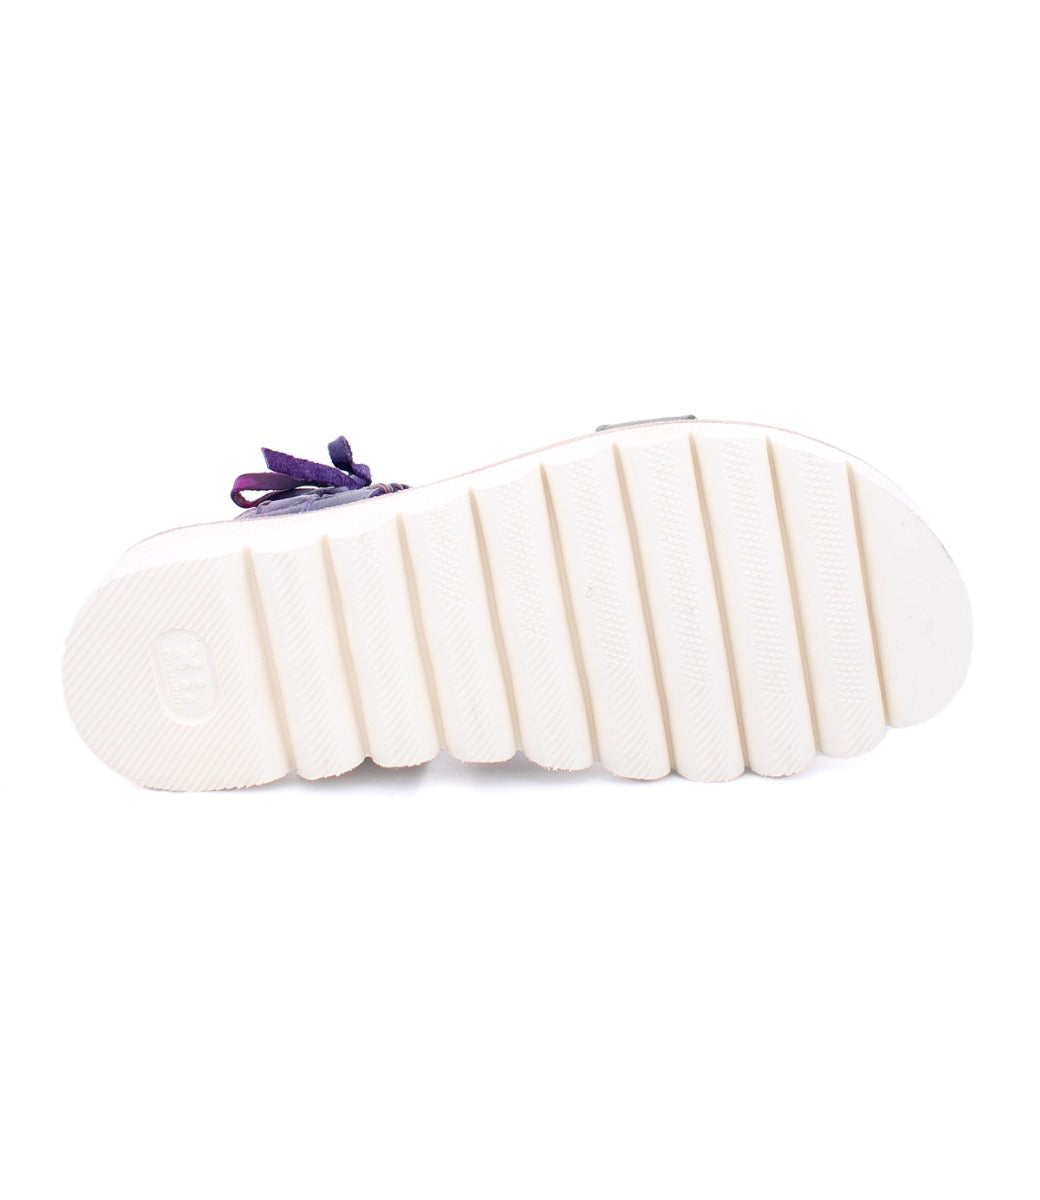 A pair of Zoe II sandals by Bed Stu on a white background.